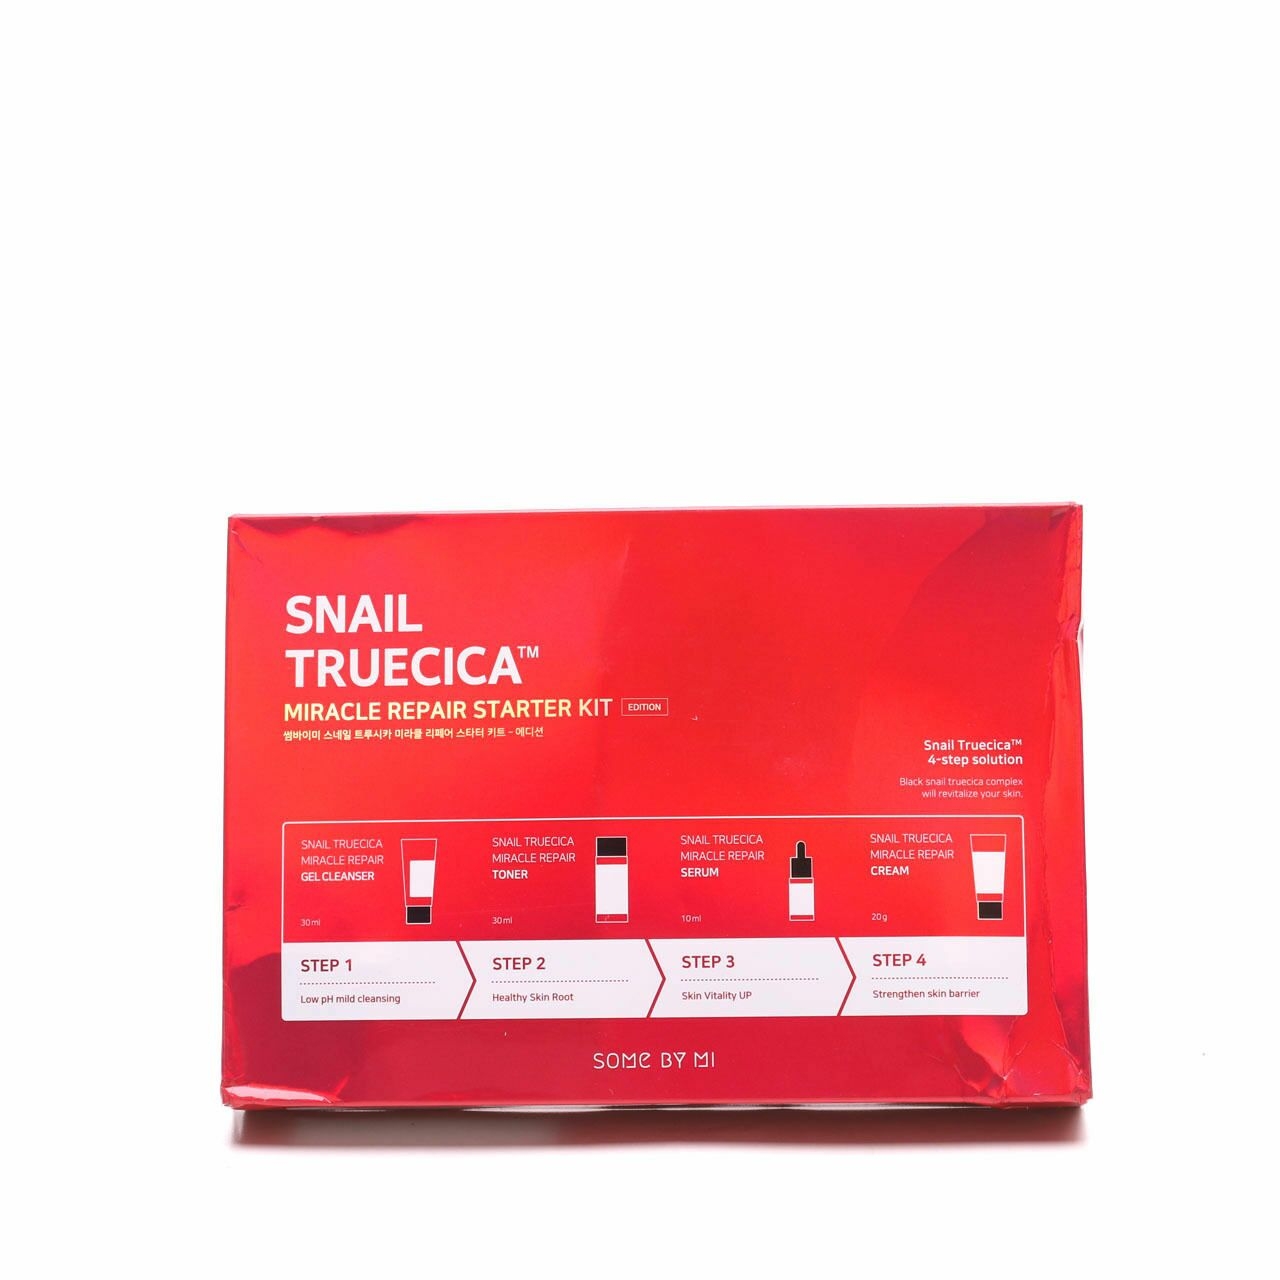 Some By Mi Snail Truecica Miracle Repair Starter Kit Sets and Palette